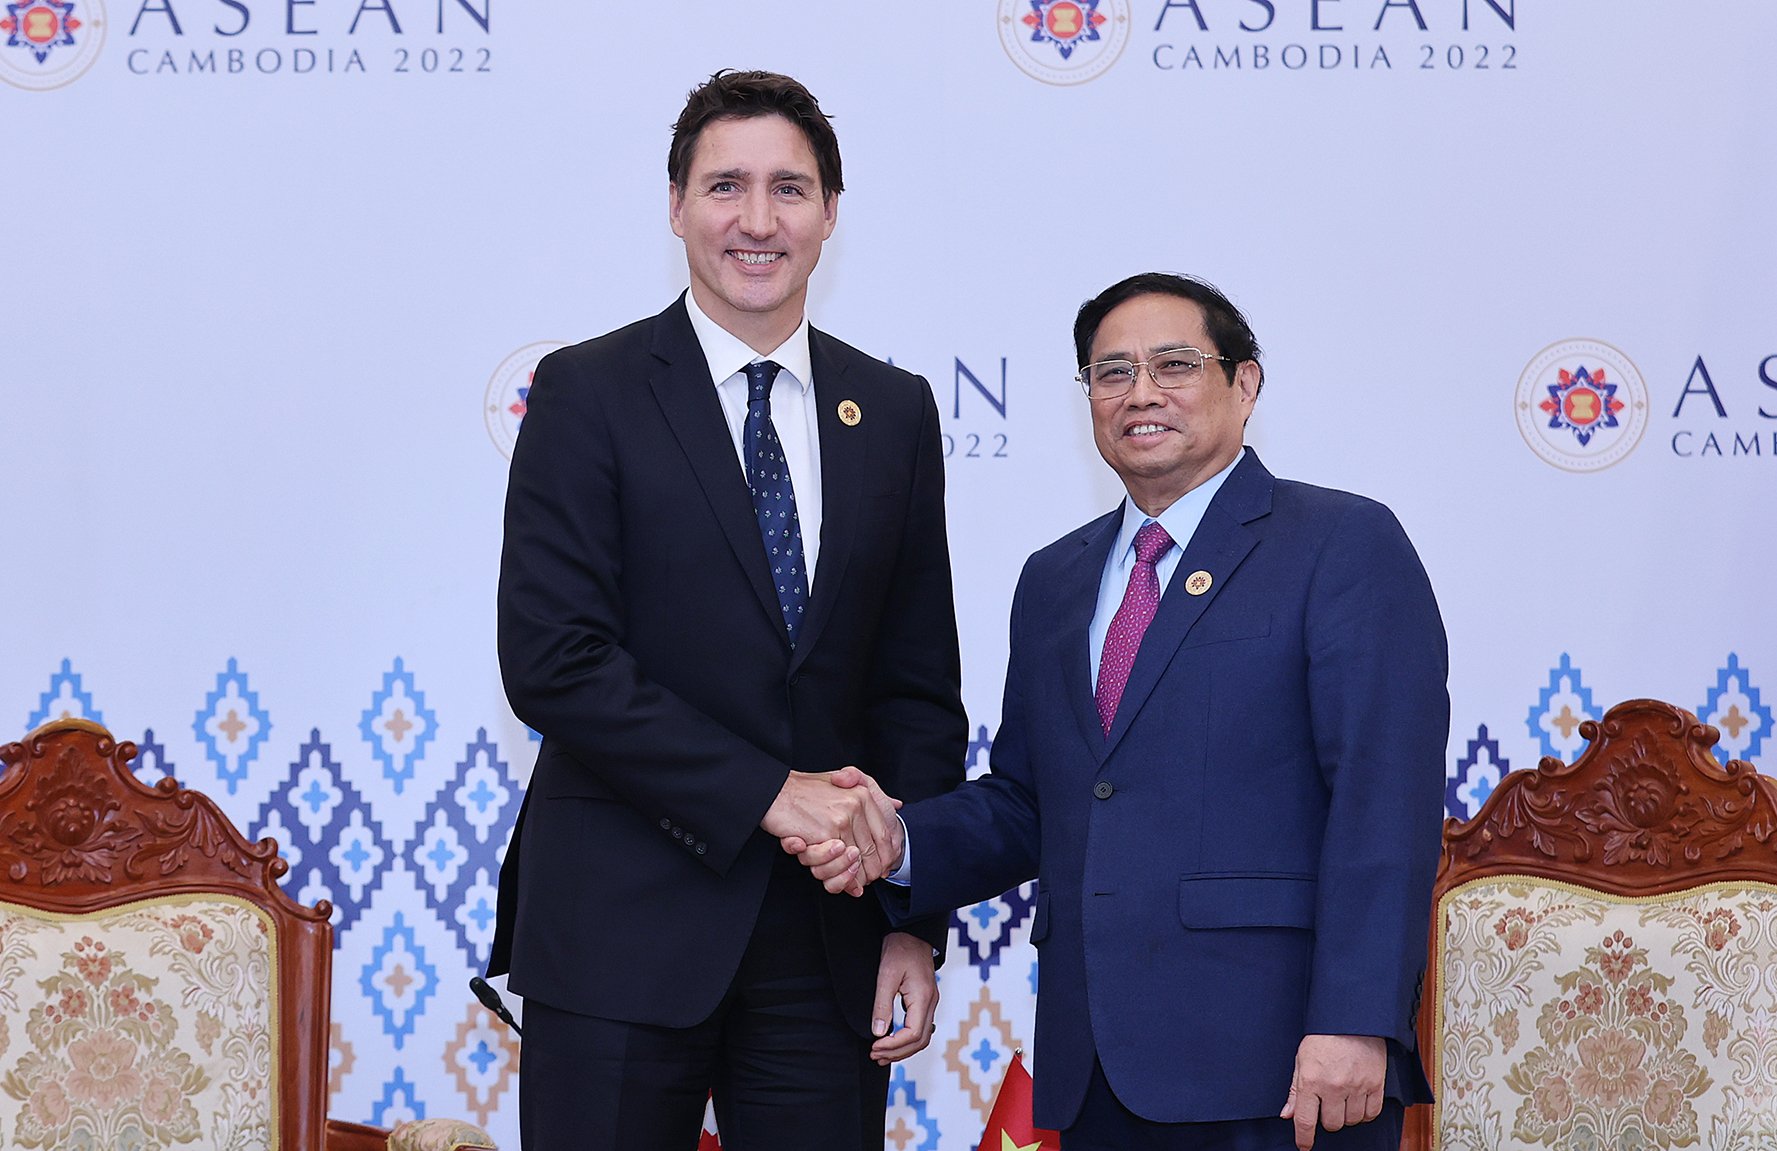 Vietnamese Prime Minister Pham Minh Chinh shakes hands with Canadian Prime Minister Justin Trudeau in Phnom Penh, November 12, 2022. Photo: D.Giang / Tuoi Tre